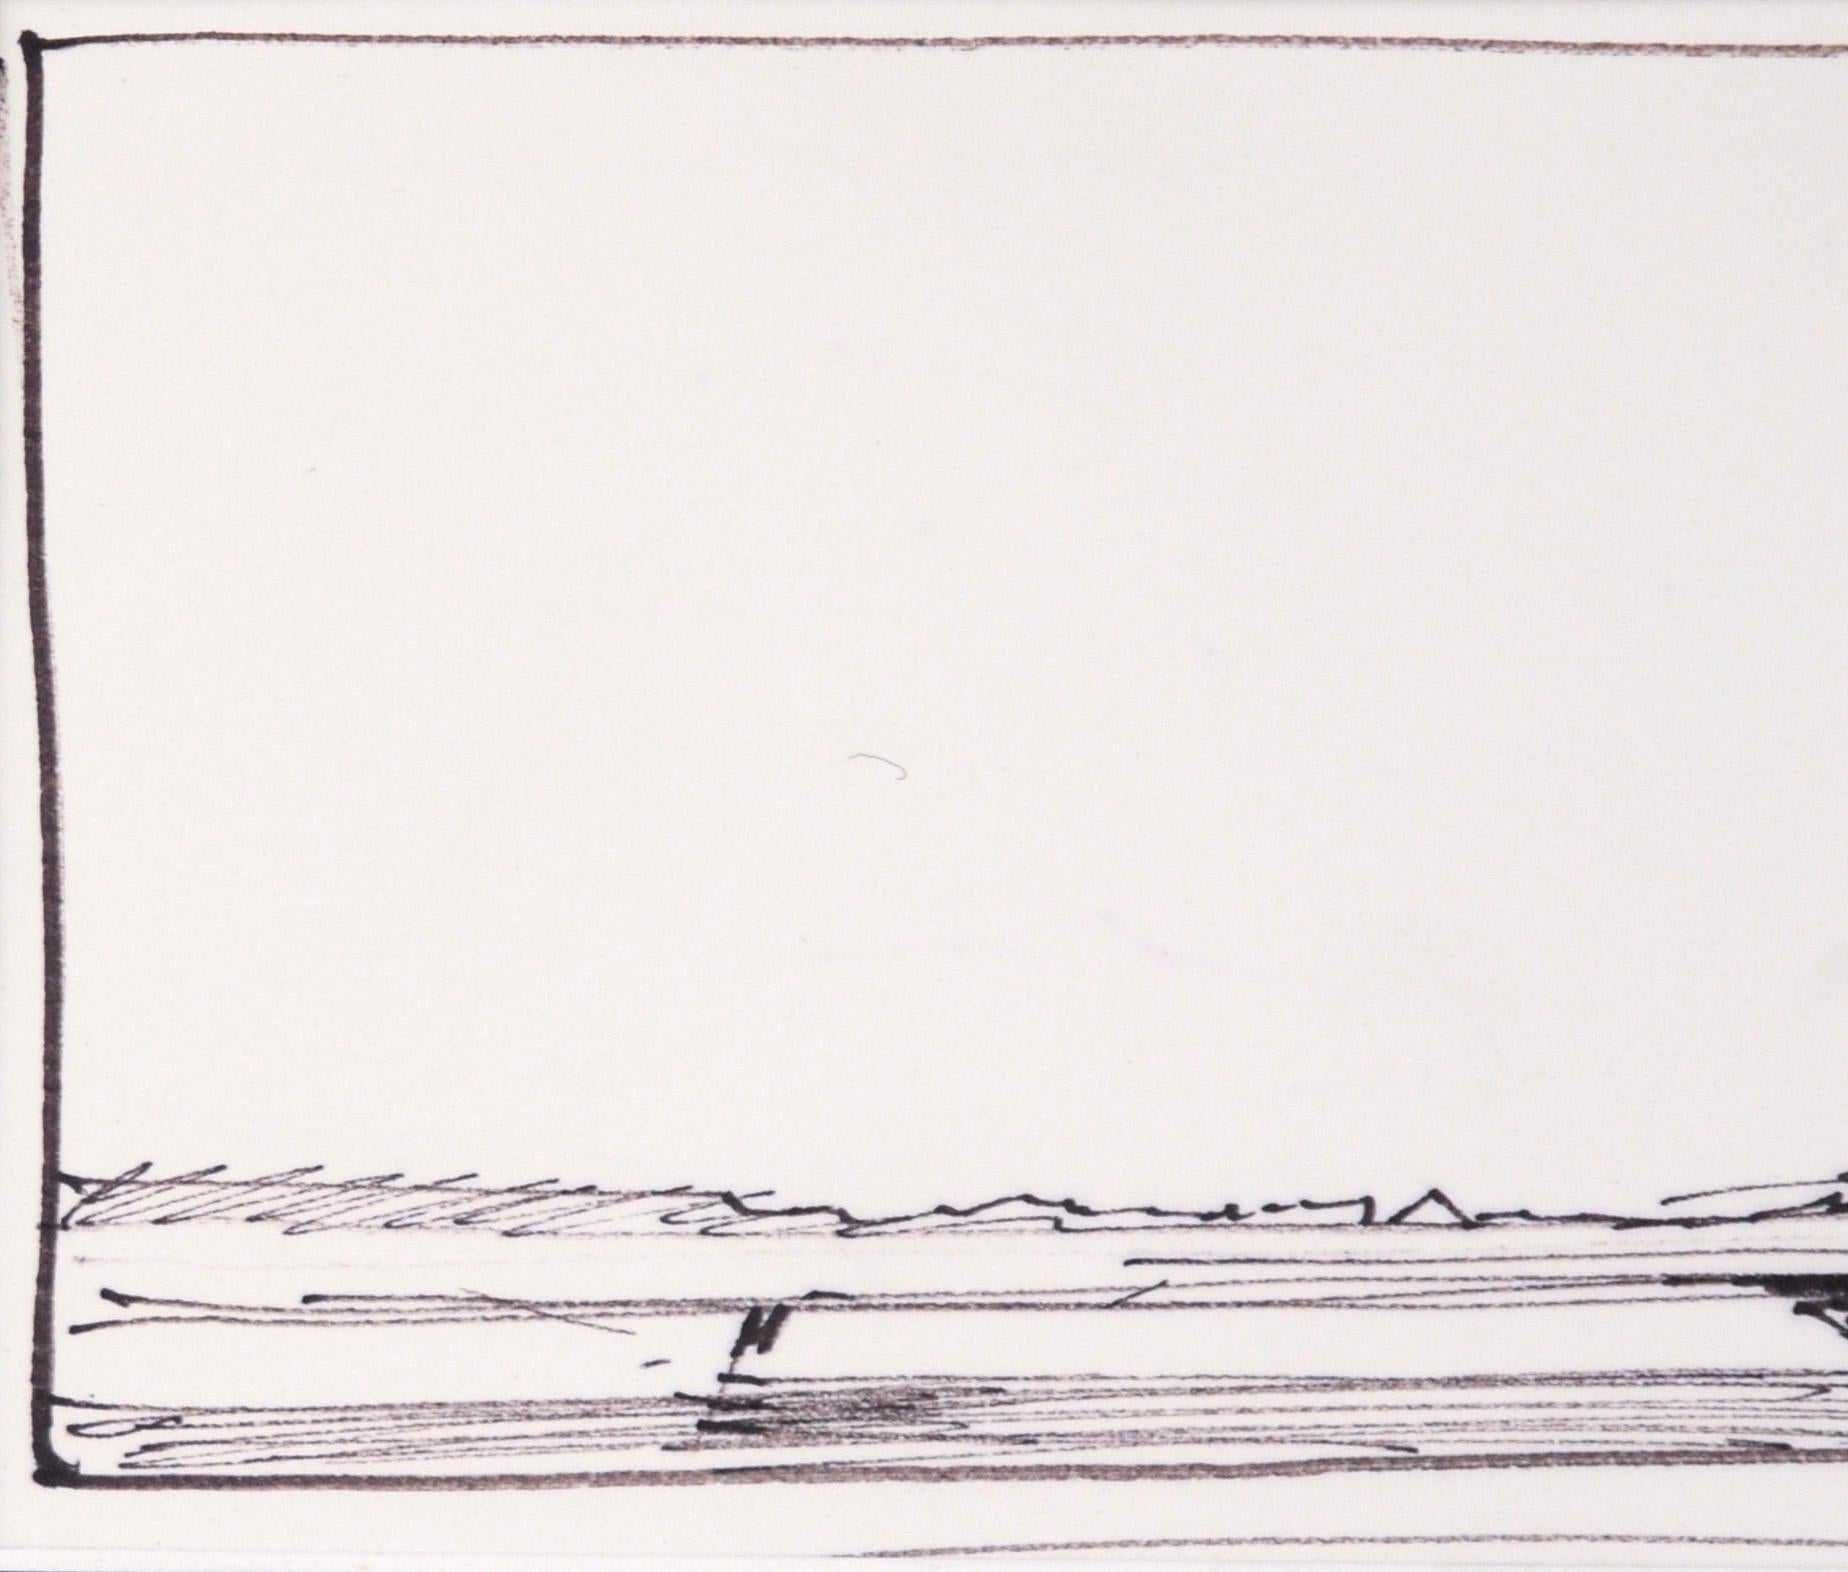 A Cloudless Sky - Line Drawing Landscape in Ink on Paper - Black Landscape Art by Laurence Sisson